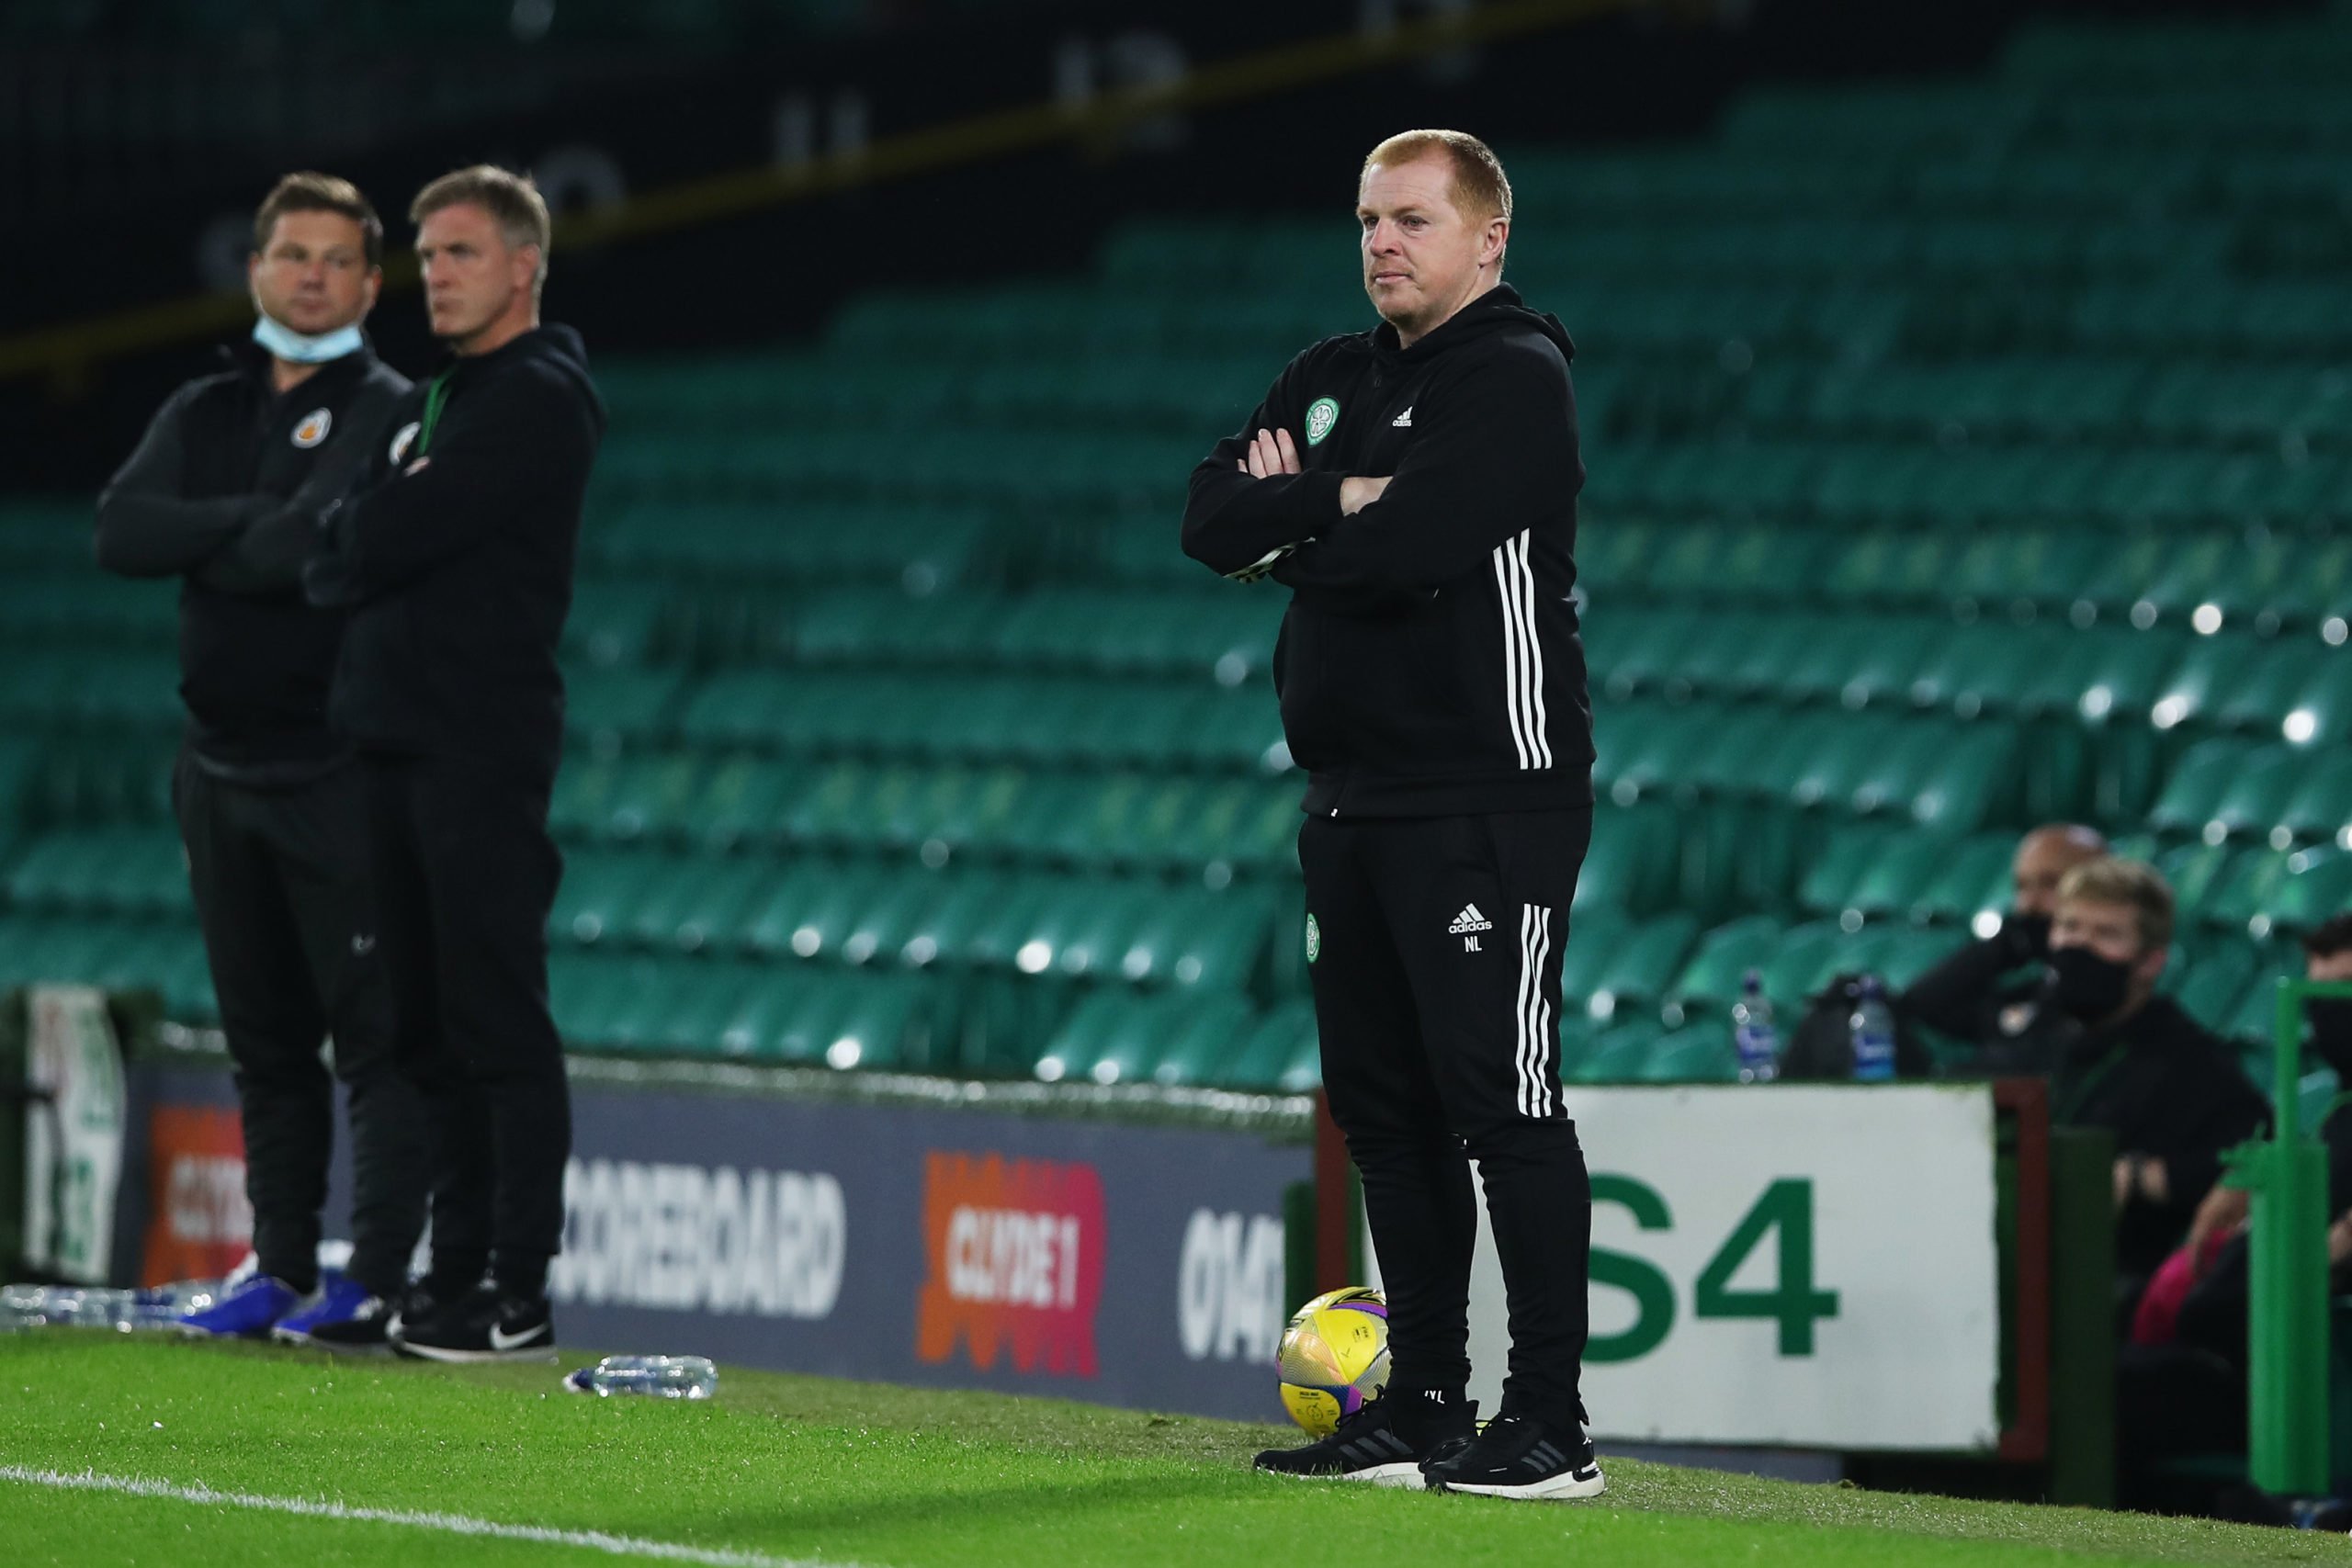 Celtic fans think they've spotted an ominous post-match hint from Neil Lennon